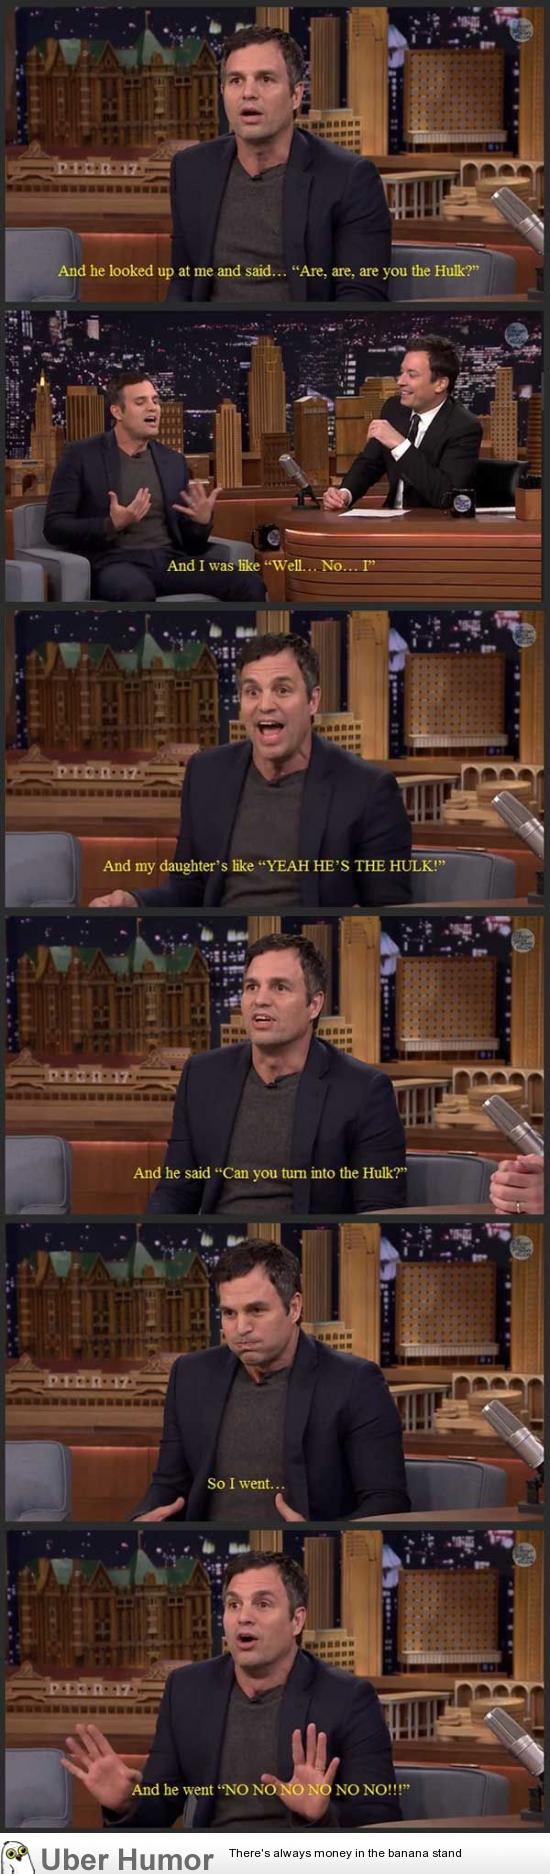 Mark Ruffalo about taking his daughter to preschool. | Funny Pictures,  Quotes, Pics, Photos, Images. Videos of Really Very Cute animals.